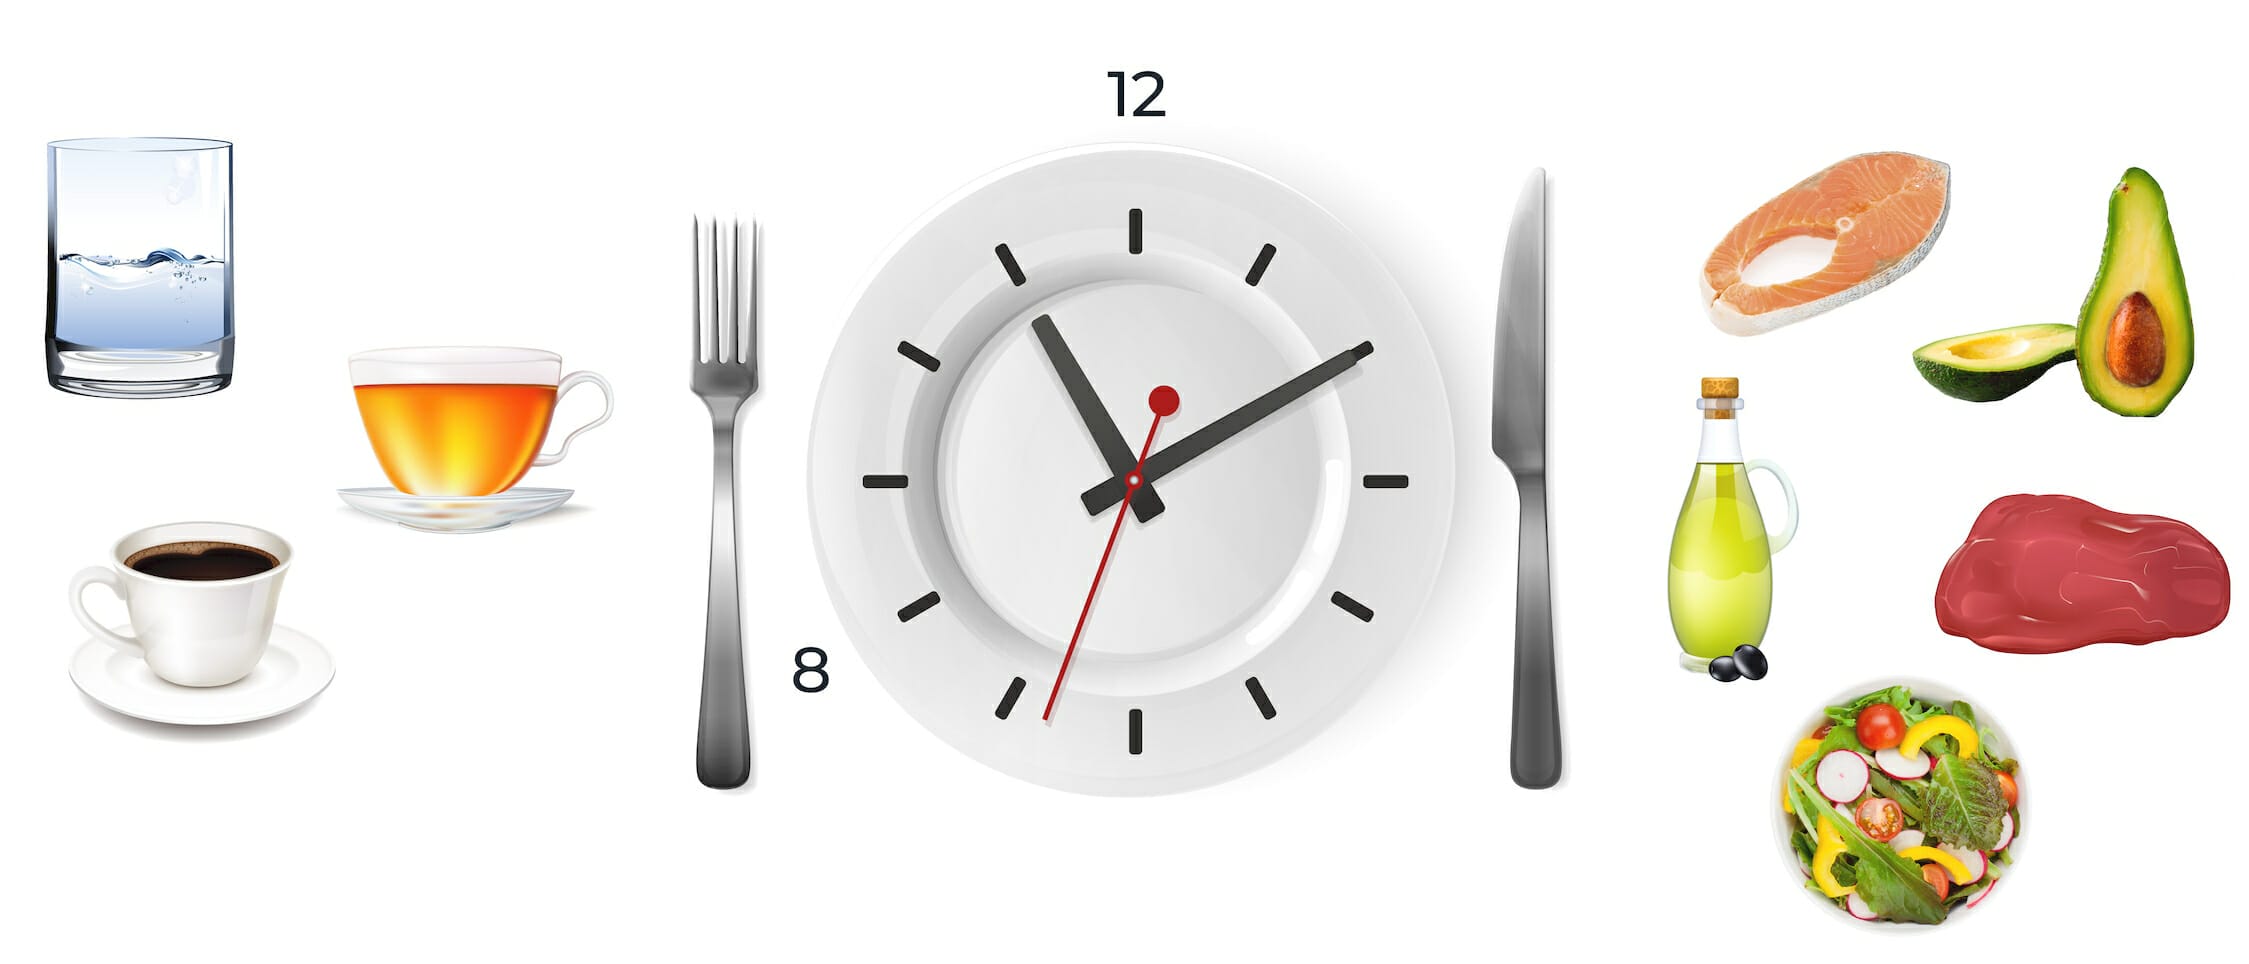 Intermittent Fasting – The Ultimate Beginner's Guide